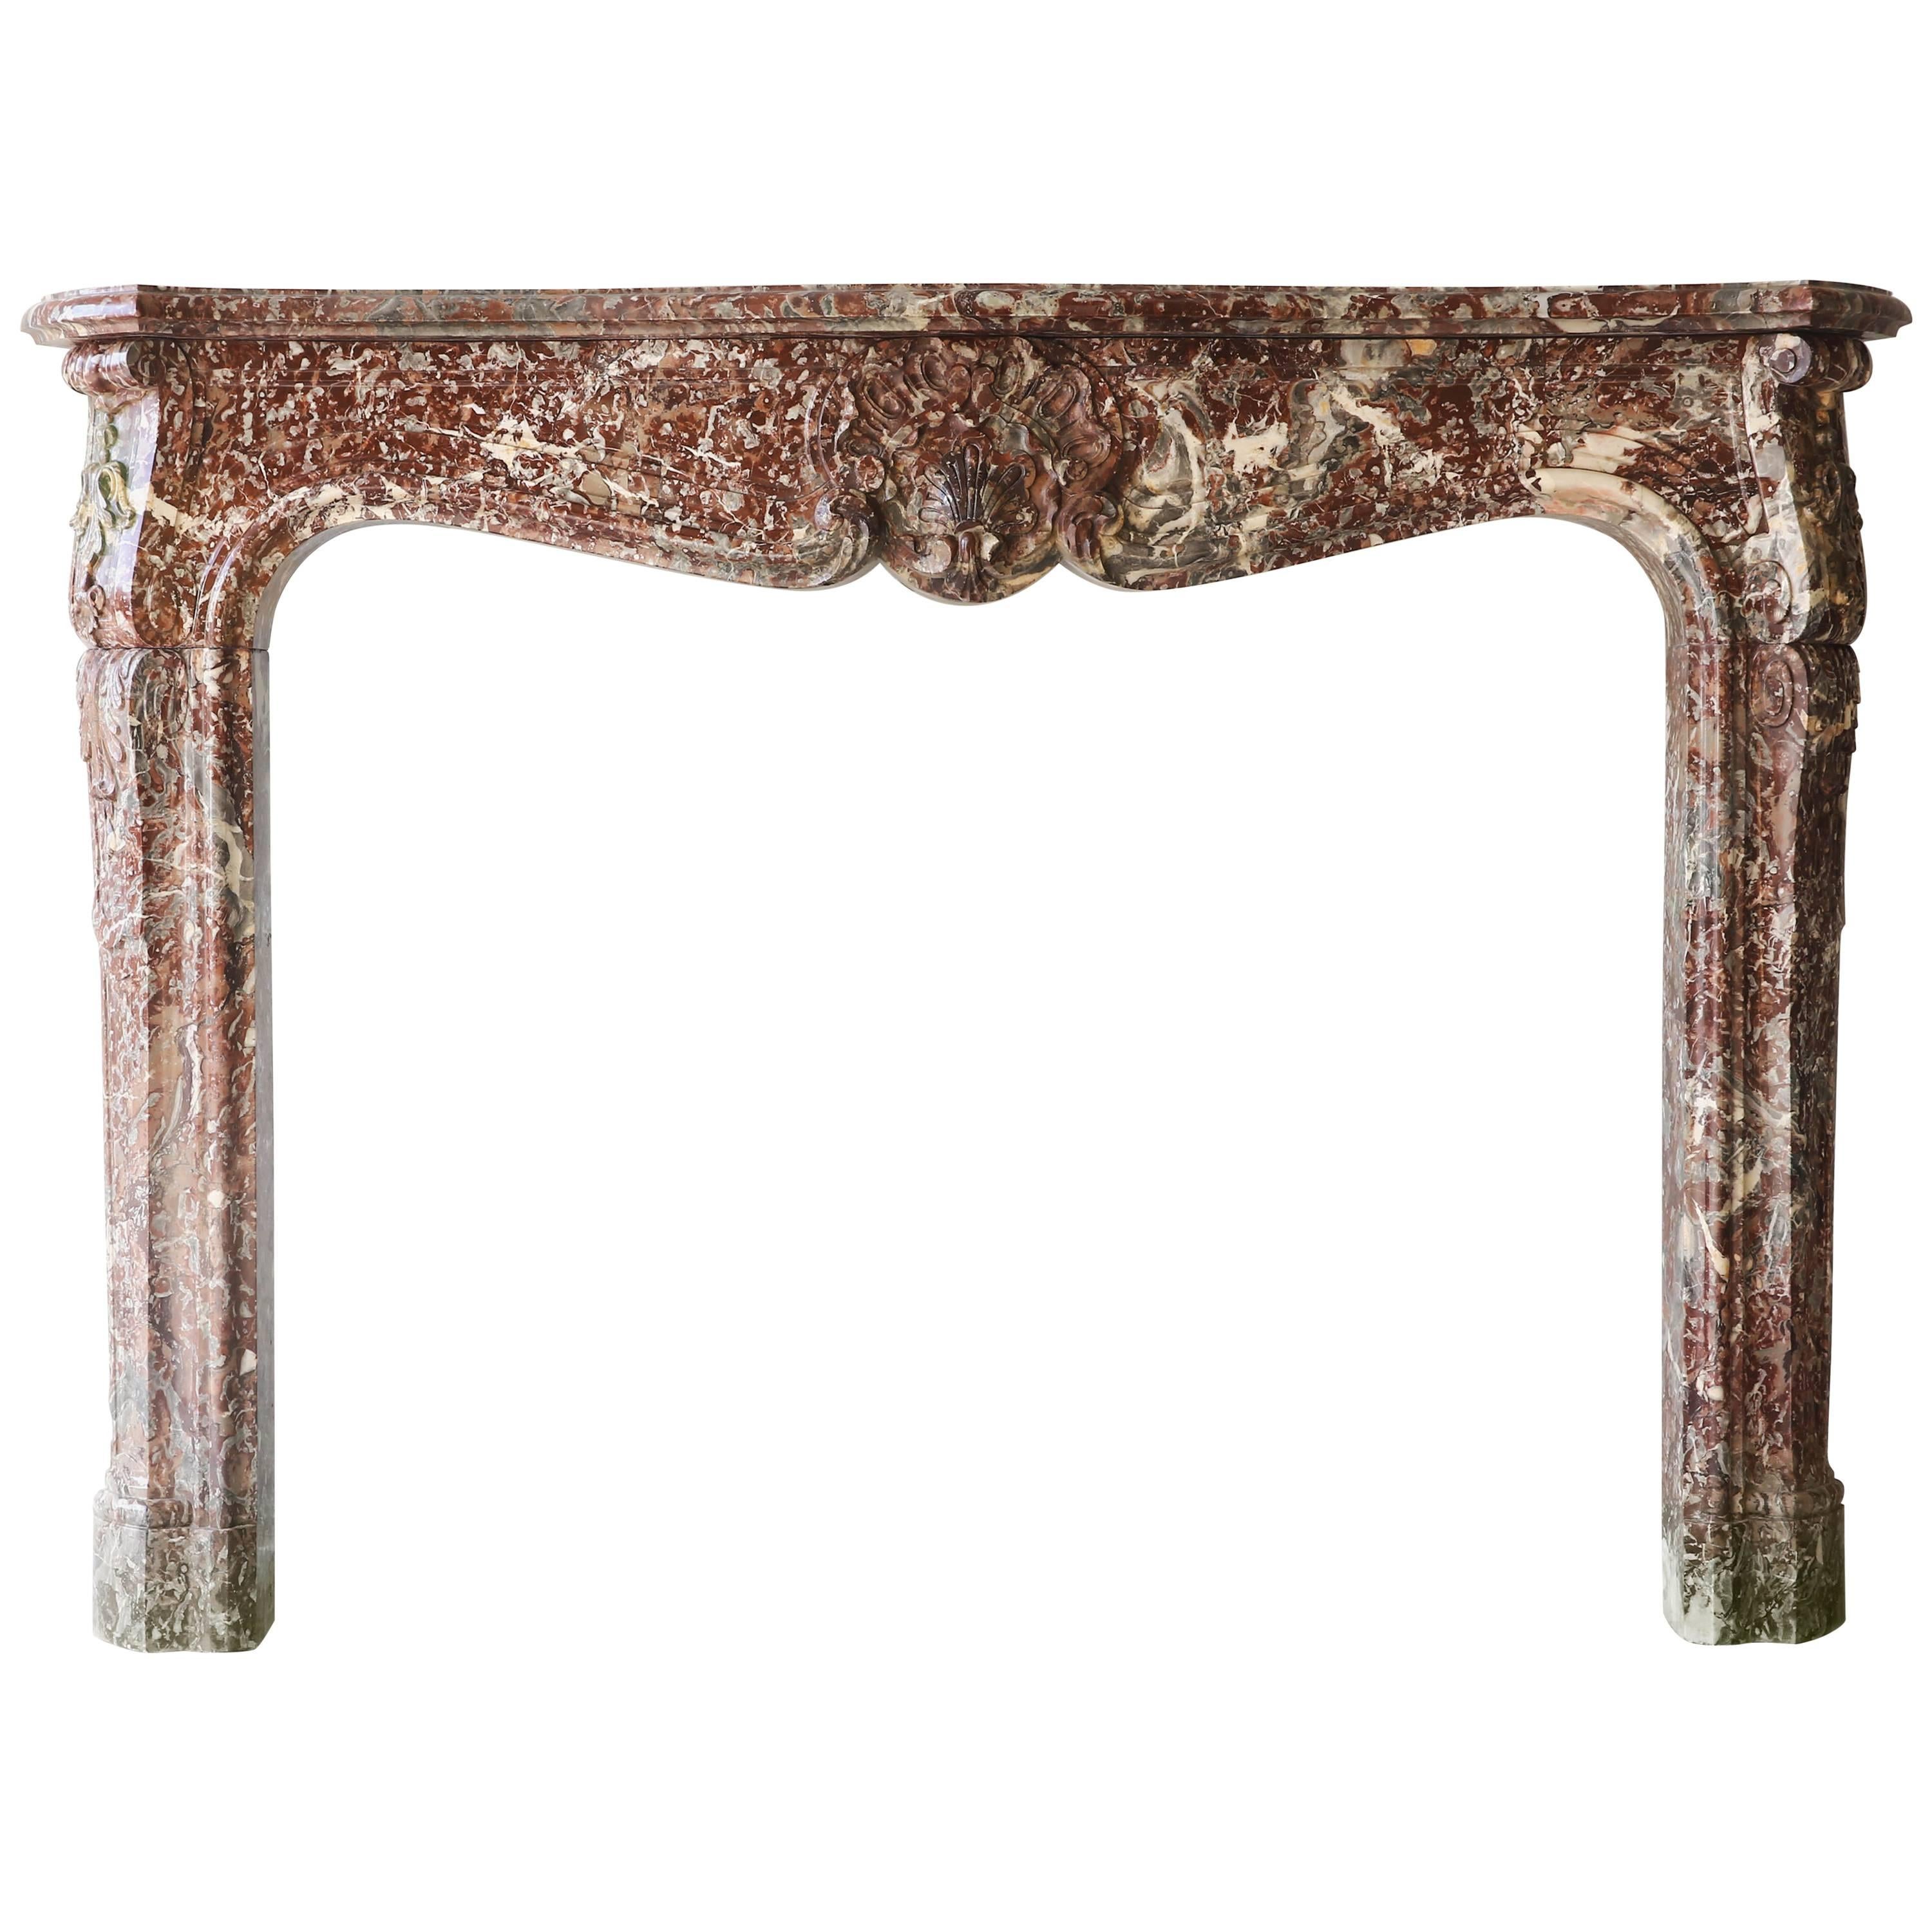 Antique Marble Fireplace, 18th Century, Style of Louis XV For Sale